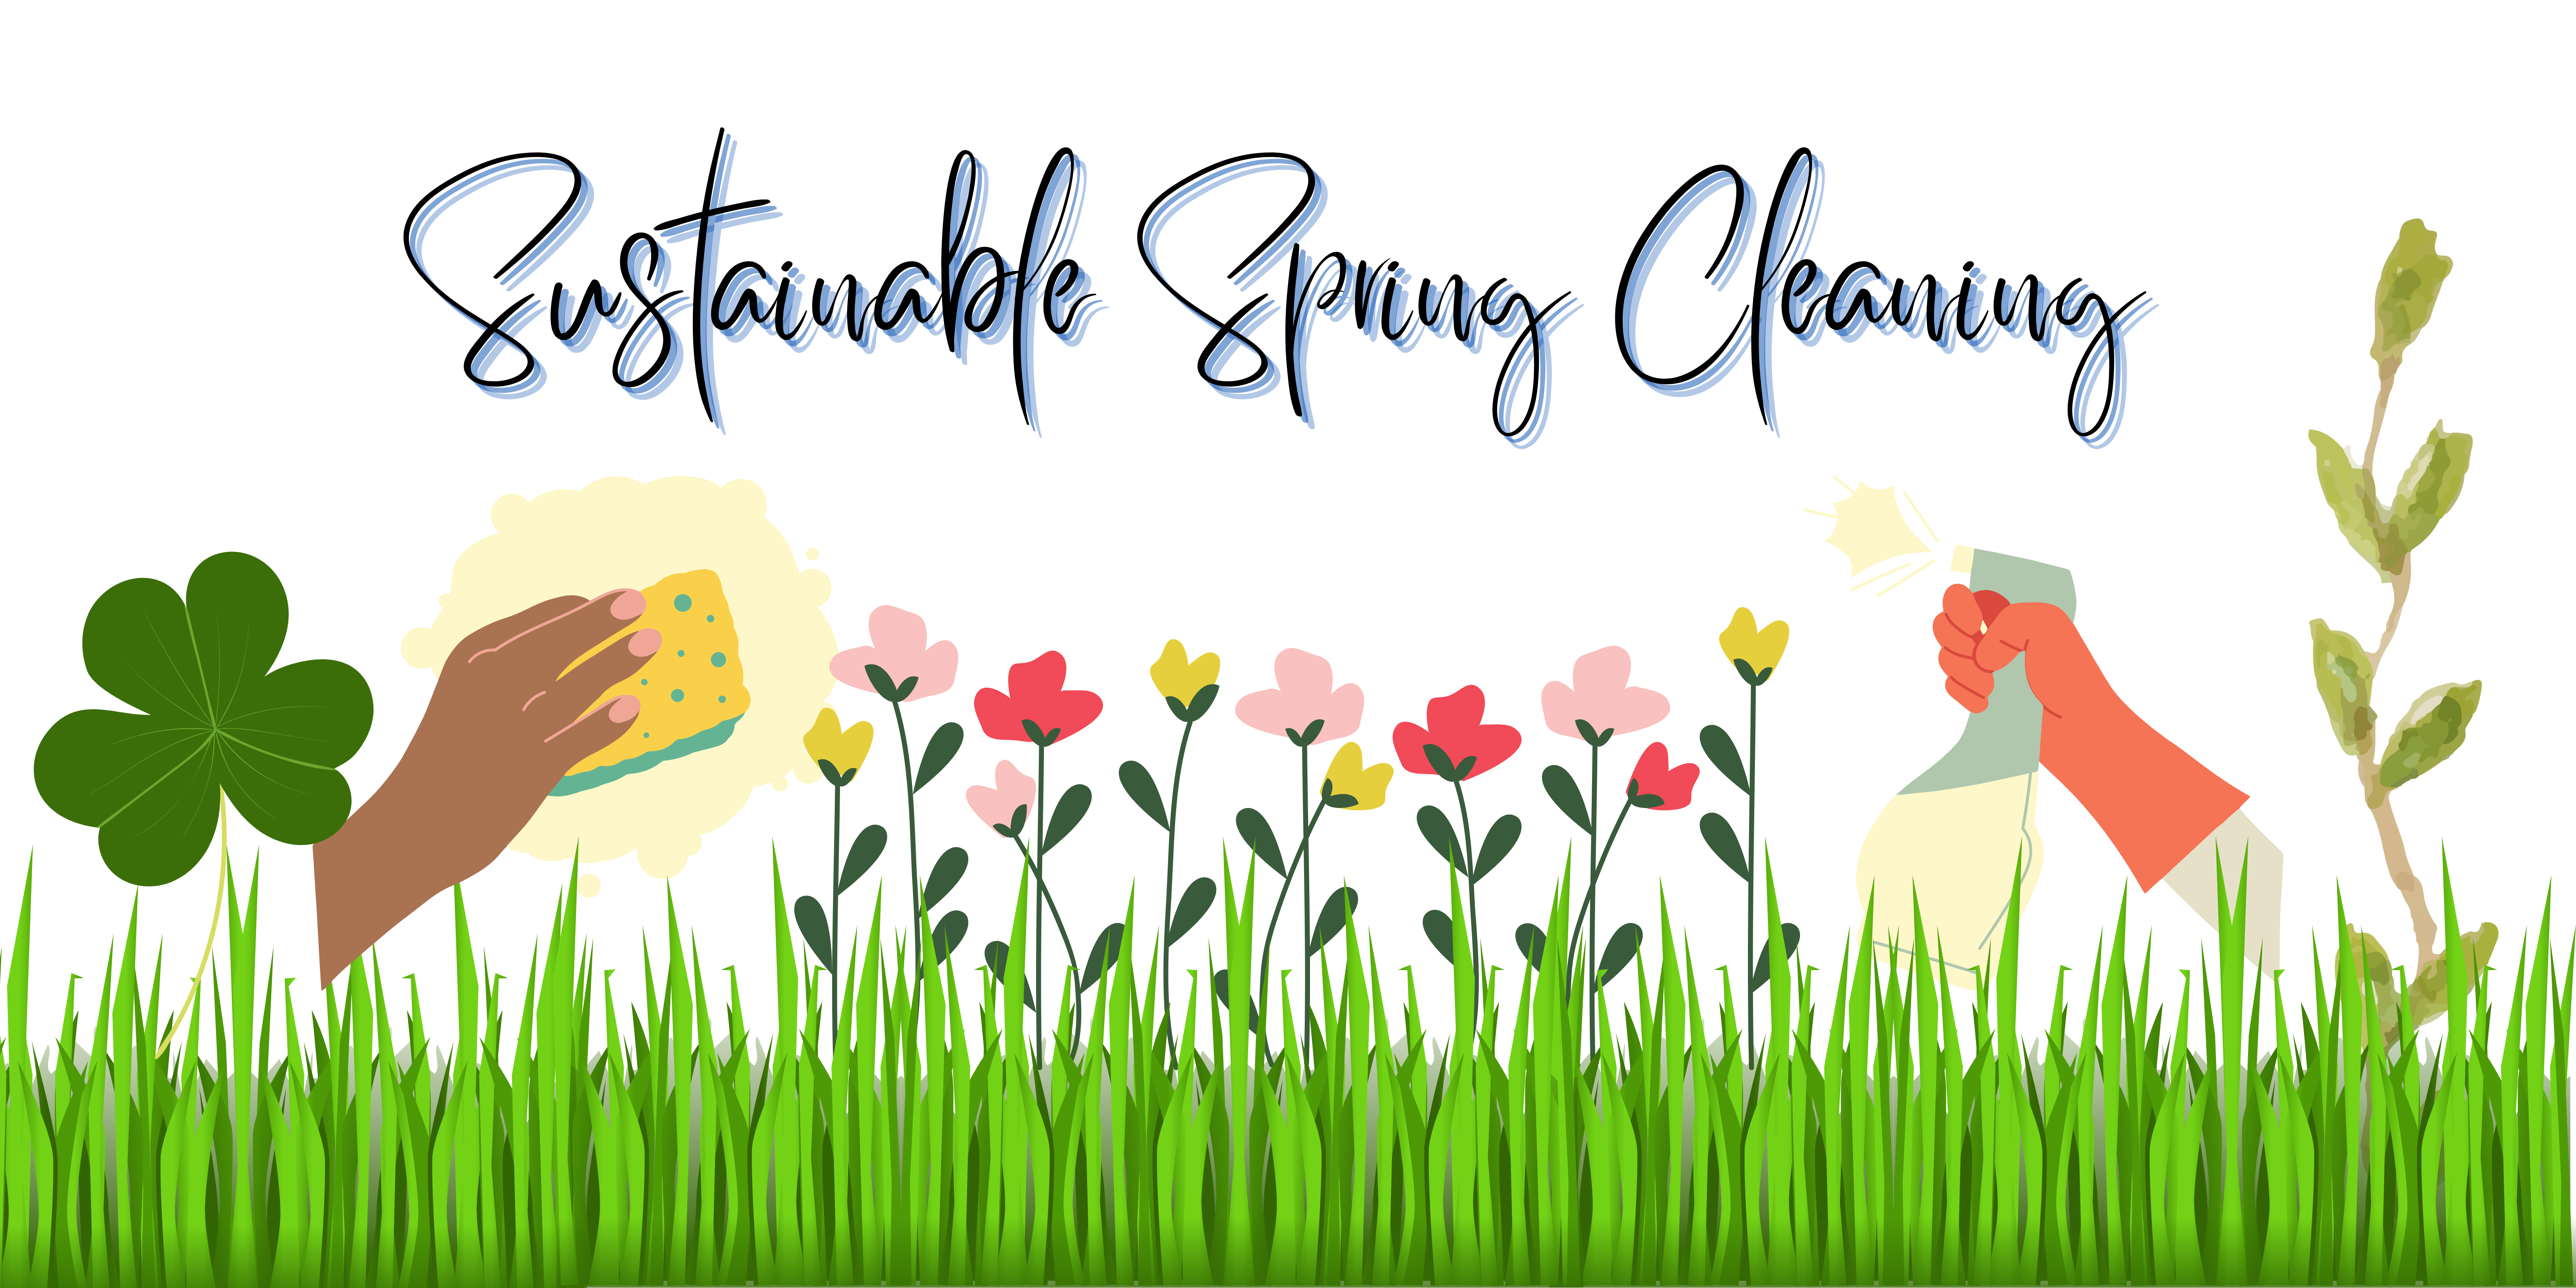 Sustainable Spring Cleaning